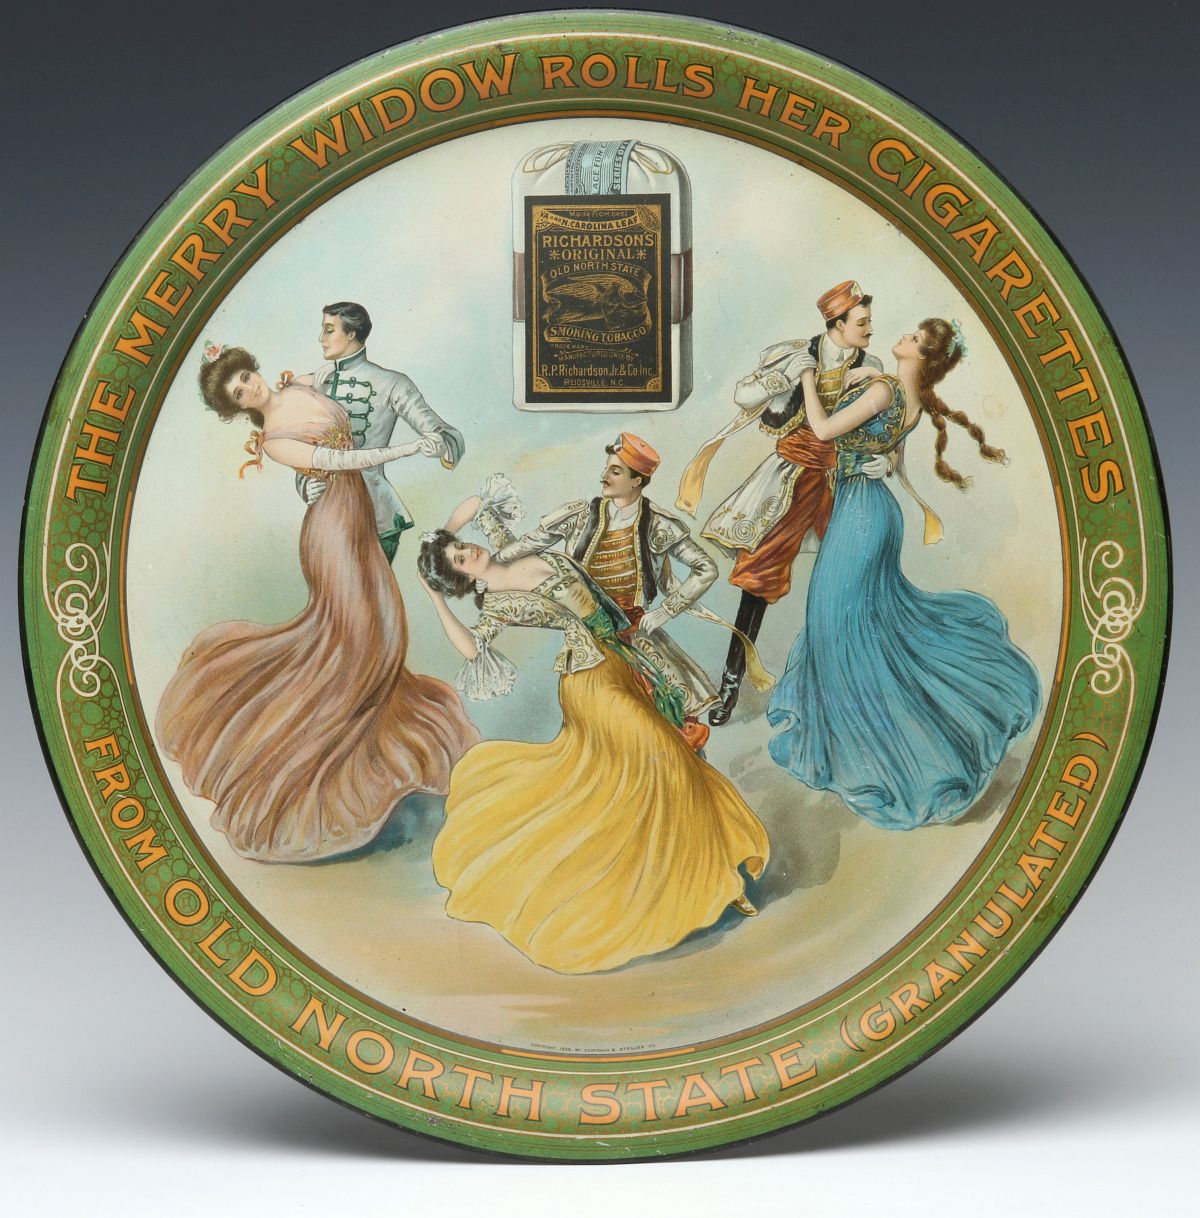 A 'MERRY WIDOW' TOBACCO ADVERTISING TRAY C. 1908